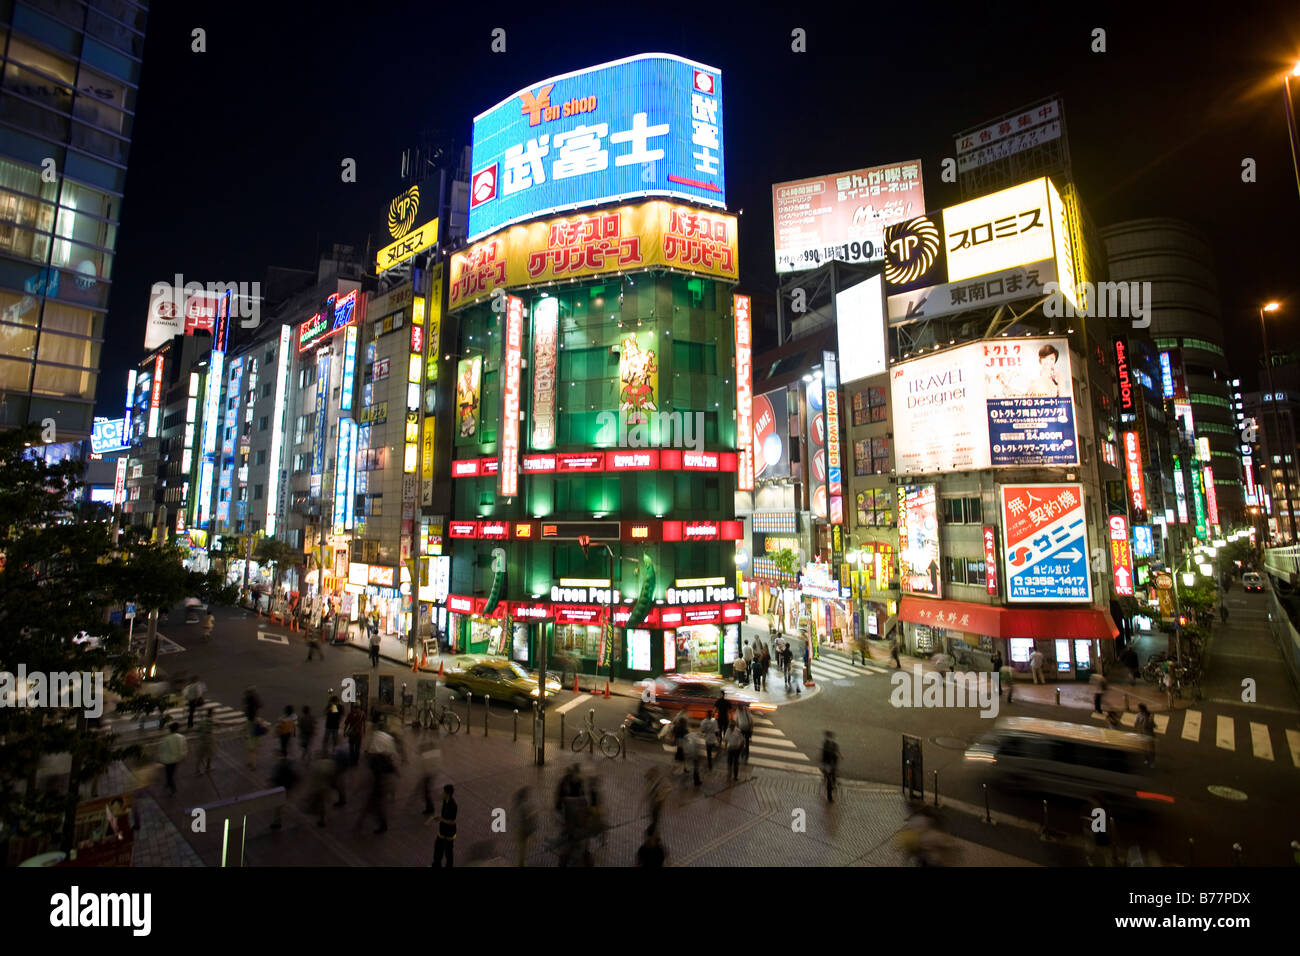 Buildings with neon signage at night, Tokyo, Japan, Asia Stock Photo